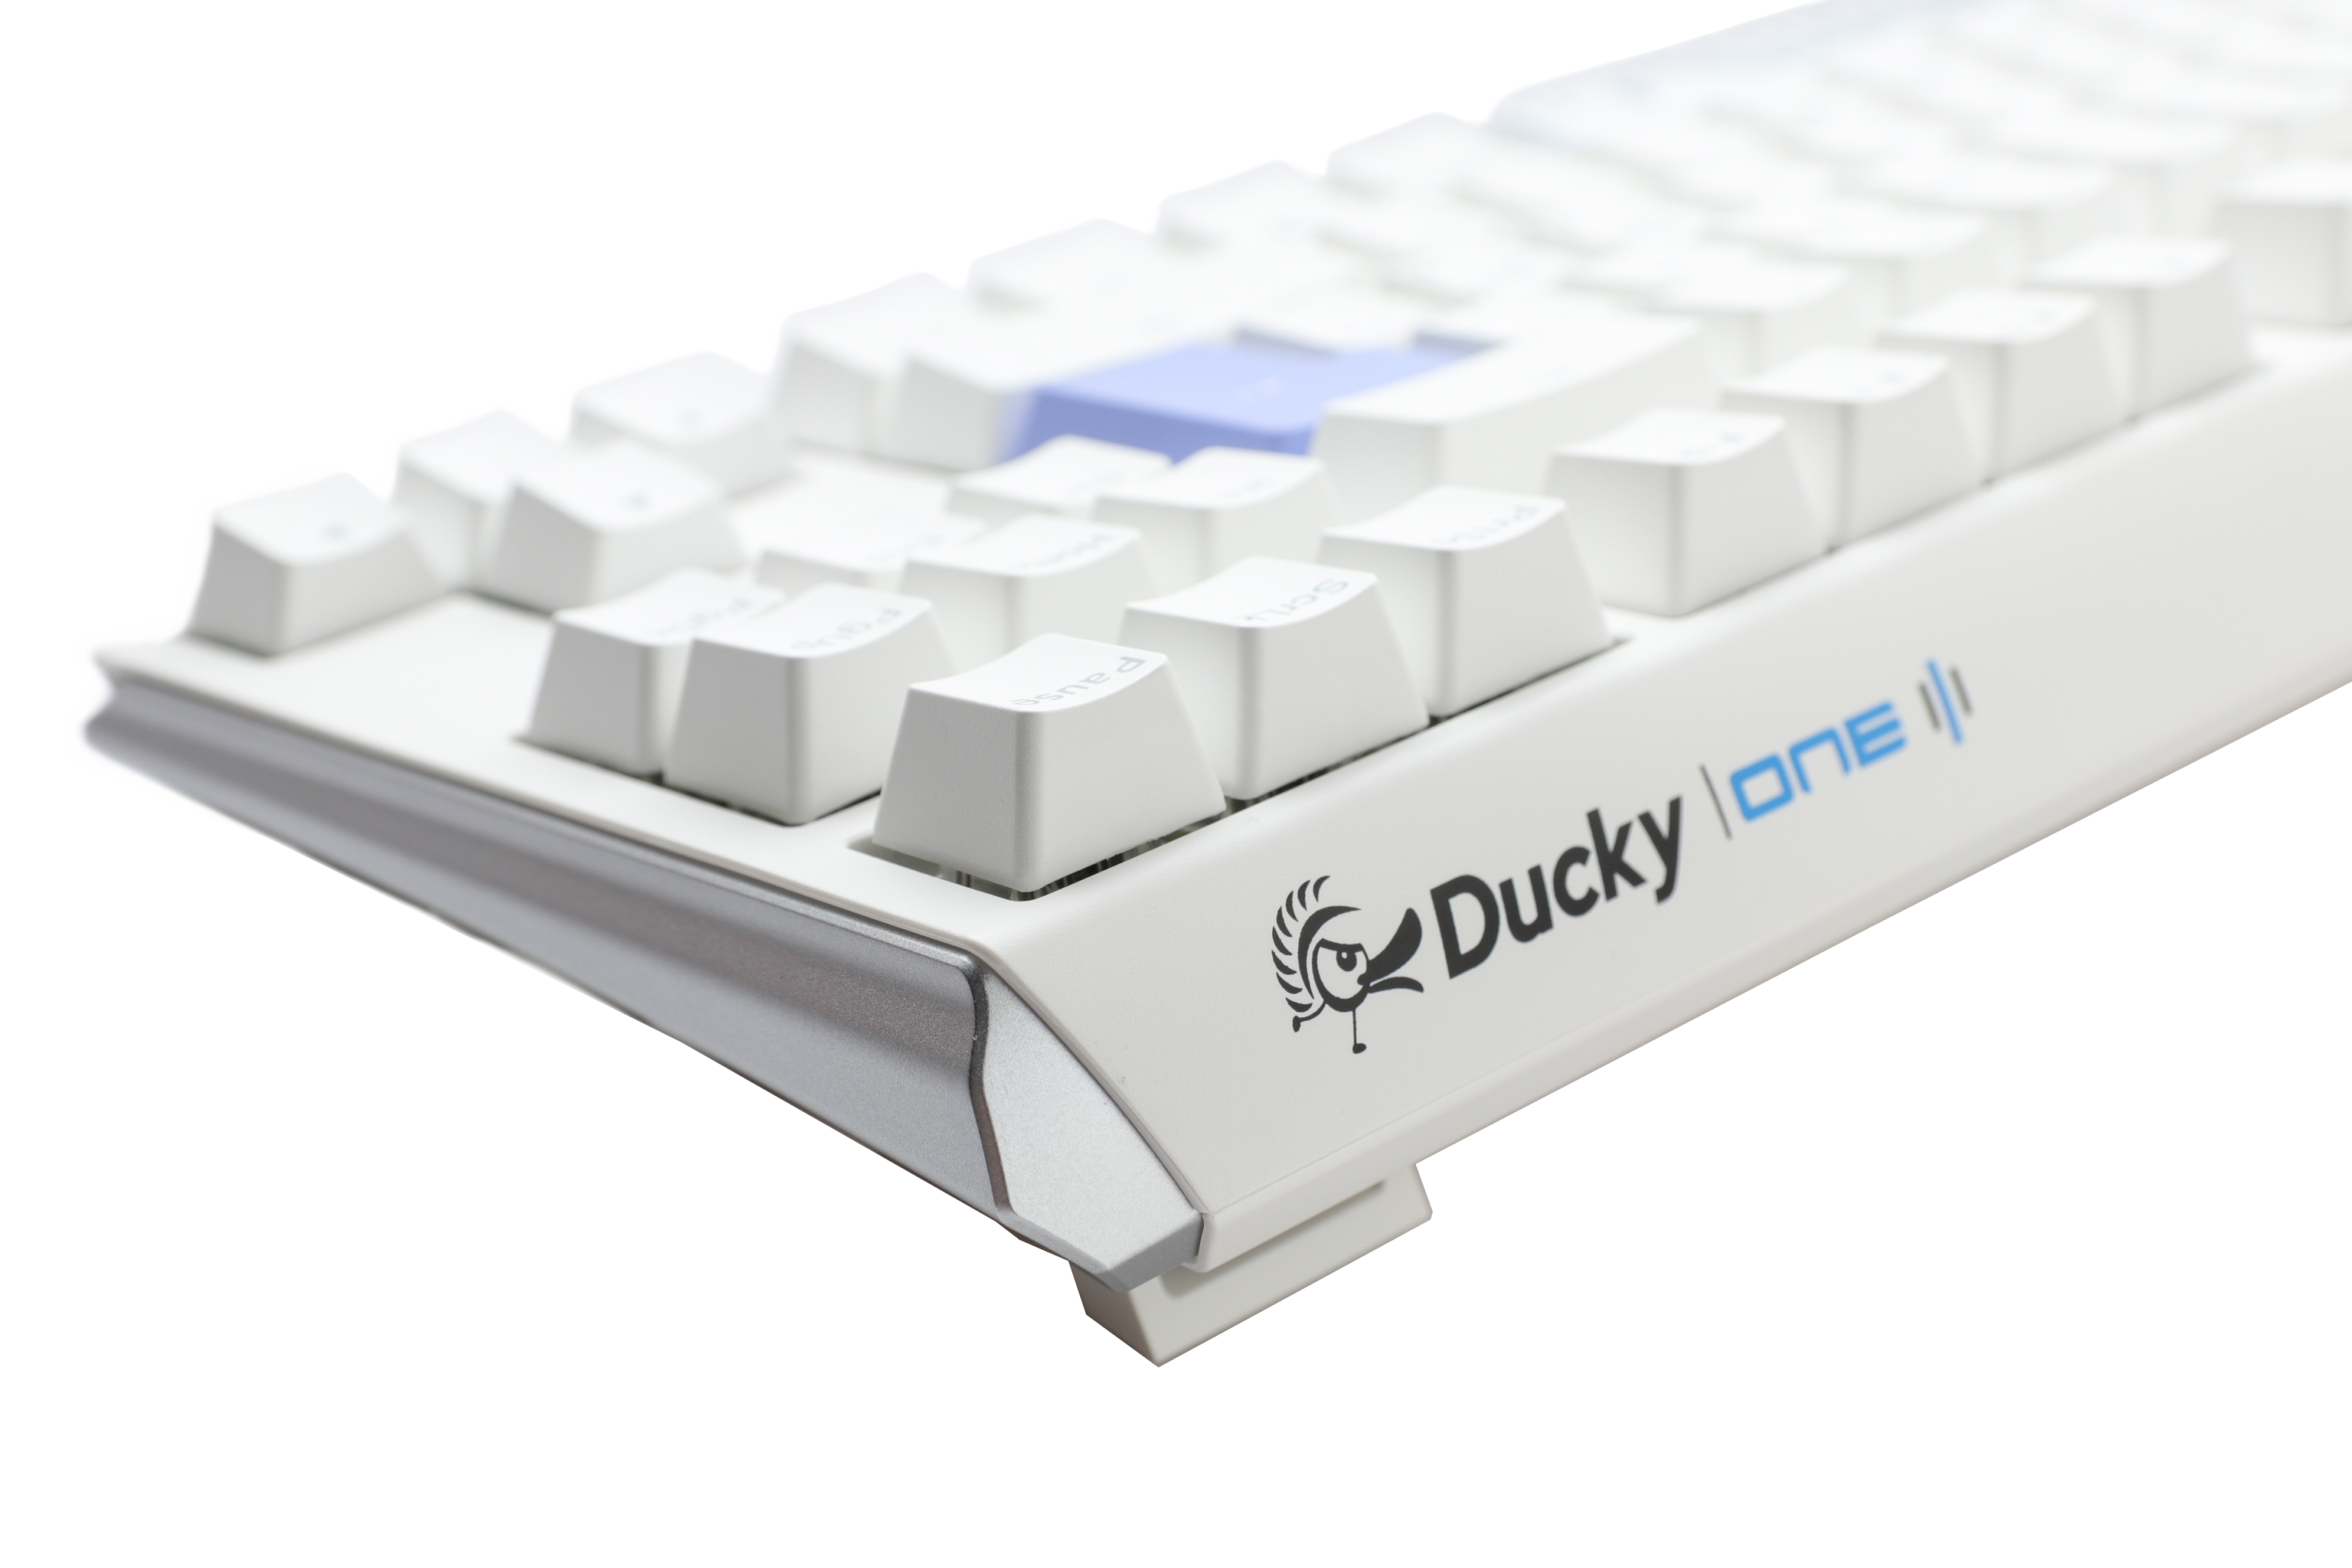 A close-up of a white mechanical keyboard, featuring PBT keycaps and the "Ducky" brand visible on the front side, set against a plain, light gray background.